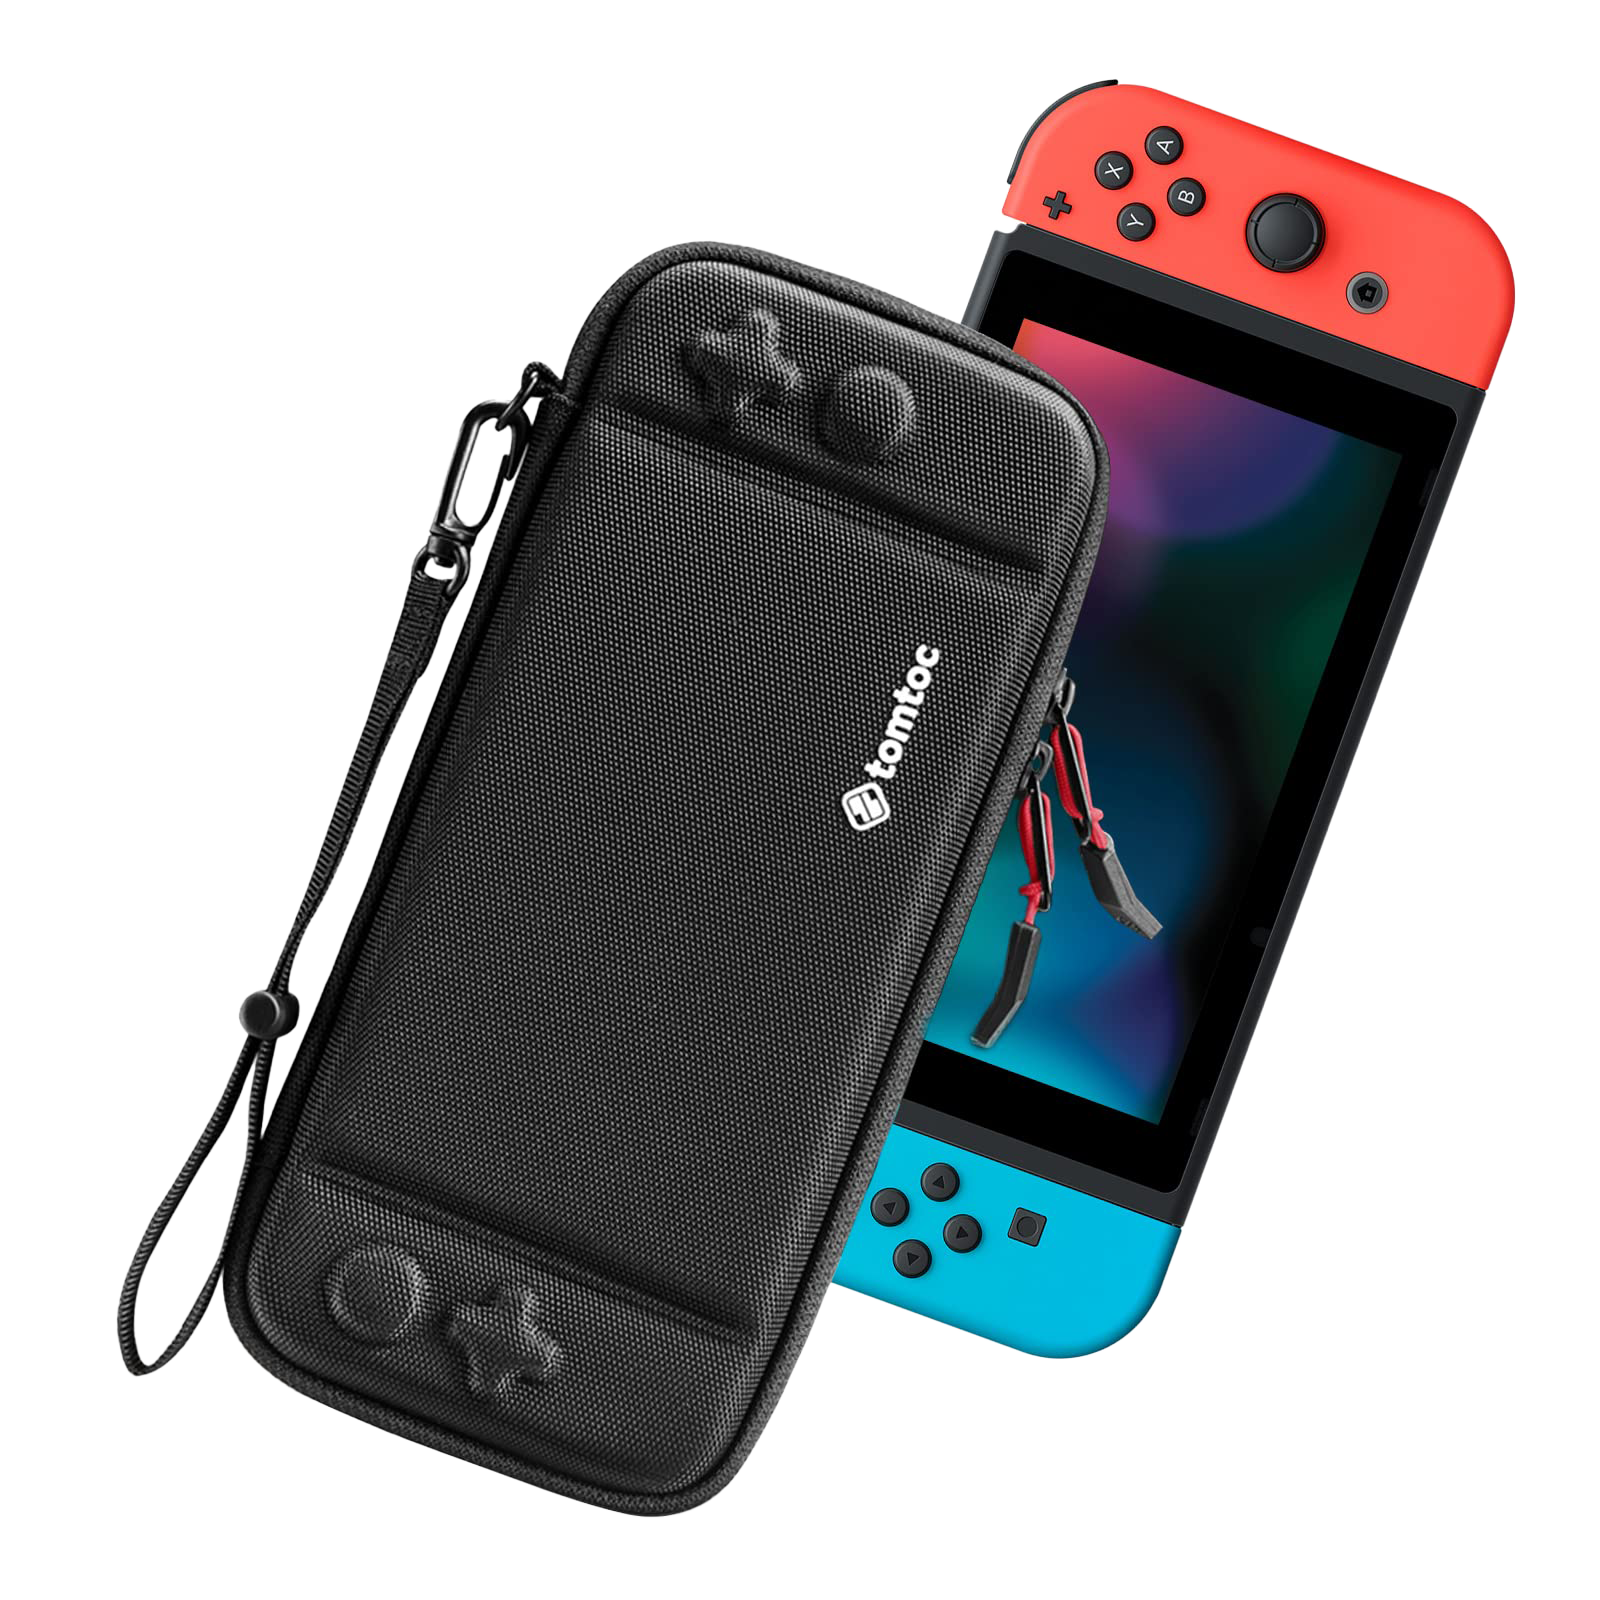 Tomtoc Slim Case for Nintendo Switch